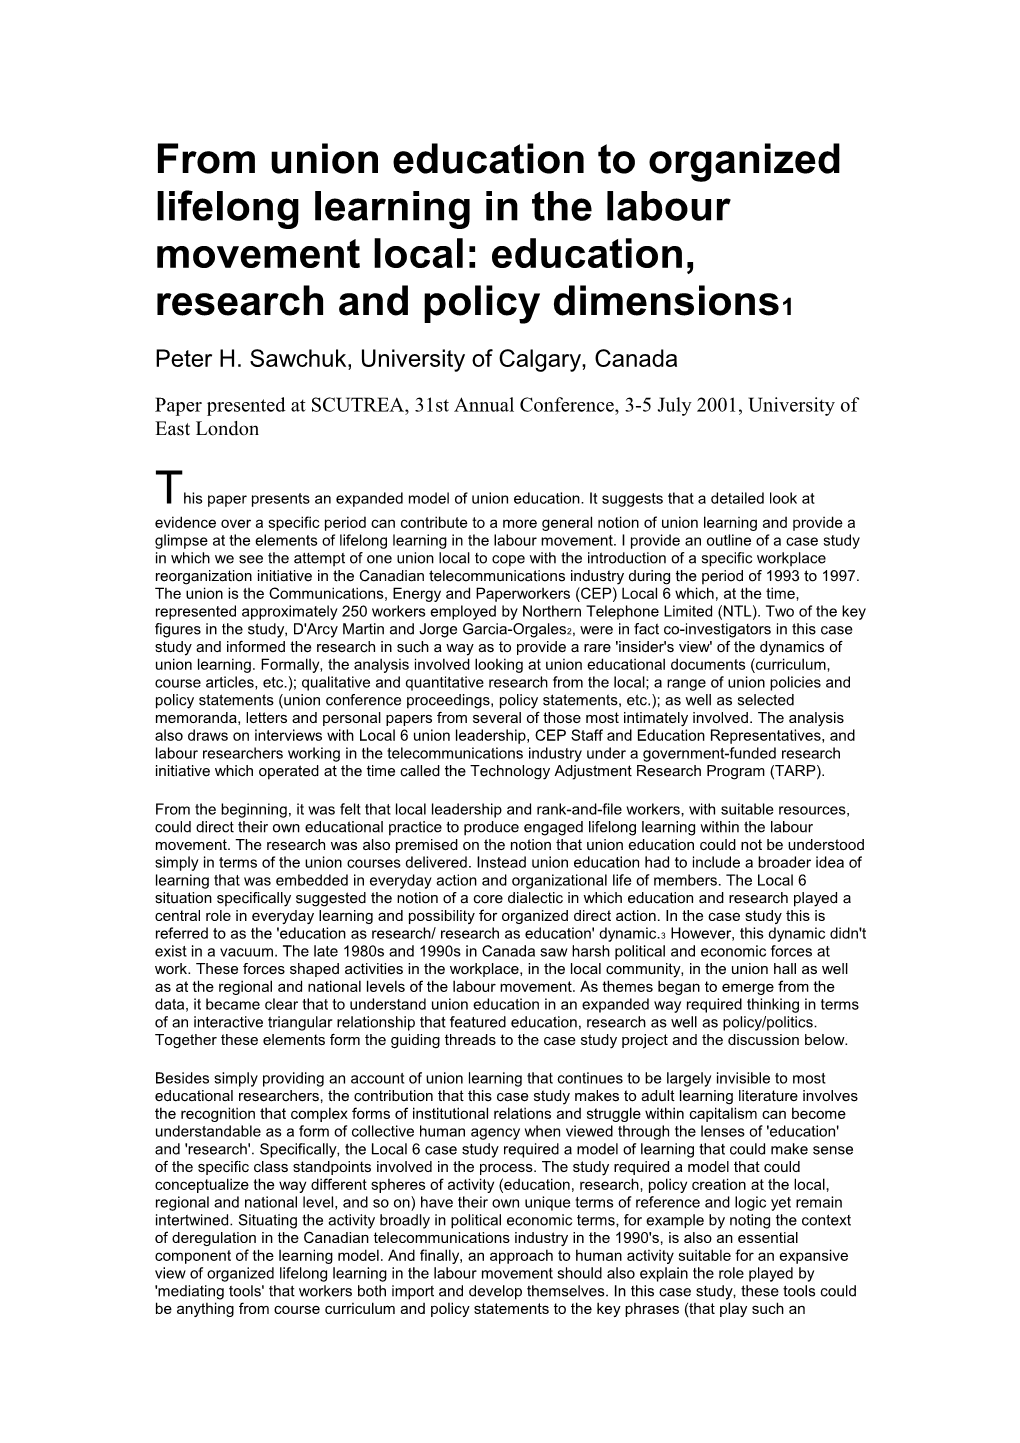 From Union Education to Organized Lifelong Learning in the Labour Movement Local: Education